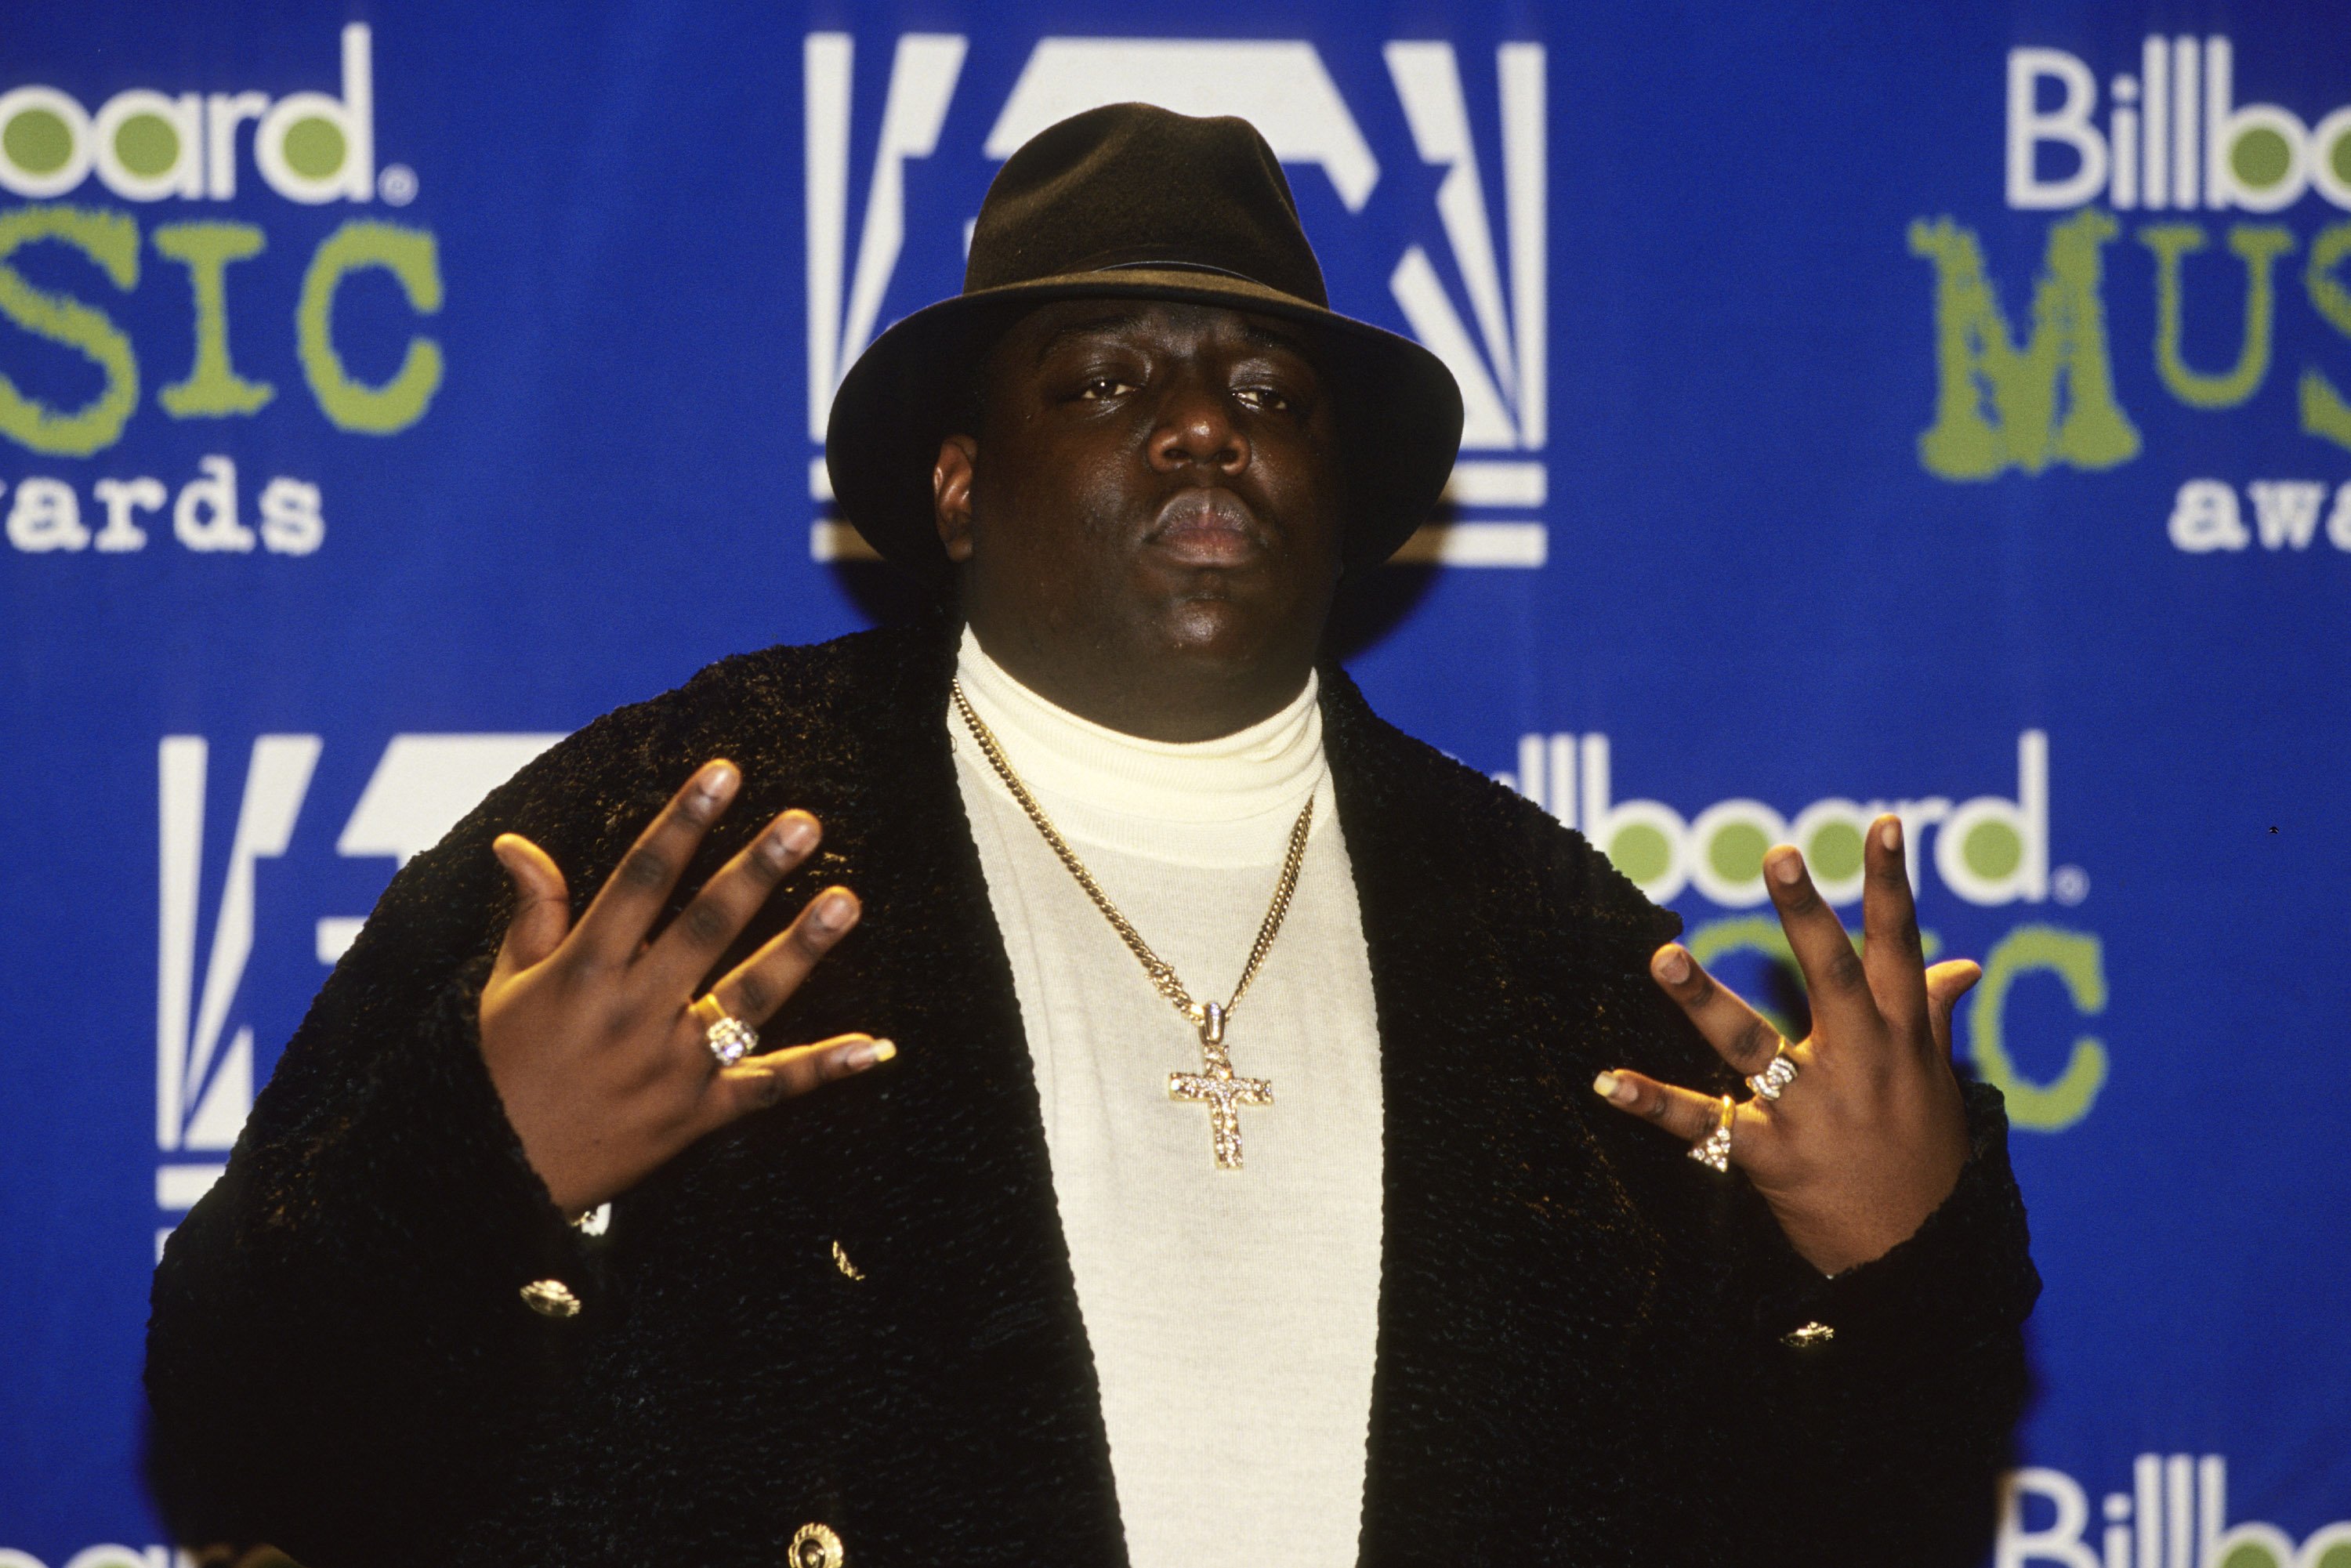 Notorious B.I.G. at the 1995 Billboard Music Awards in New York on December 6, 1996. | Photo: Getty Images